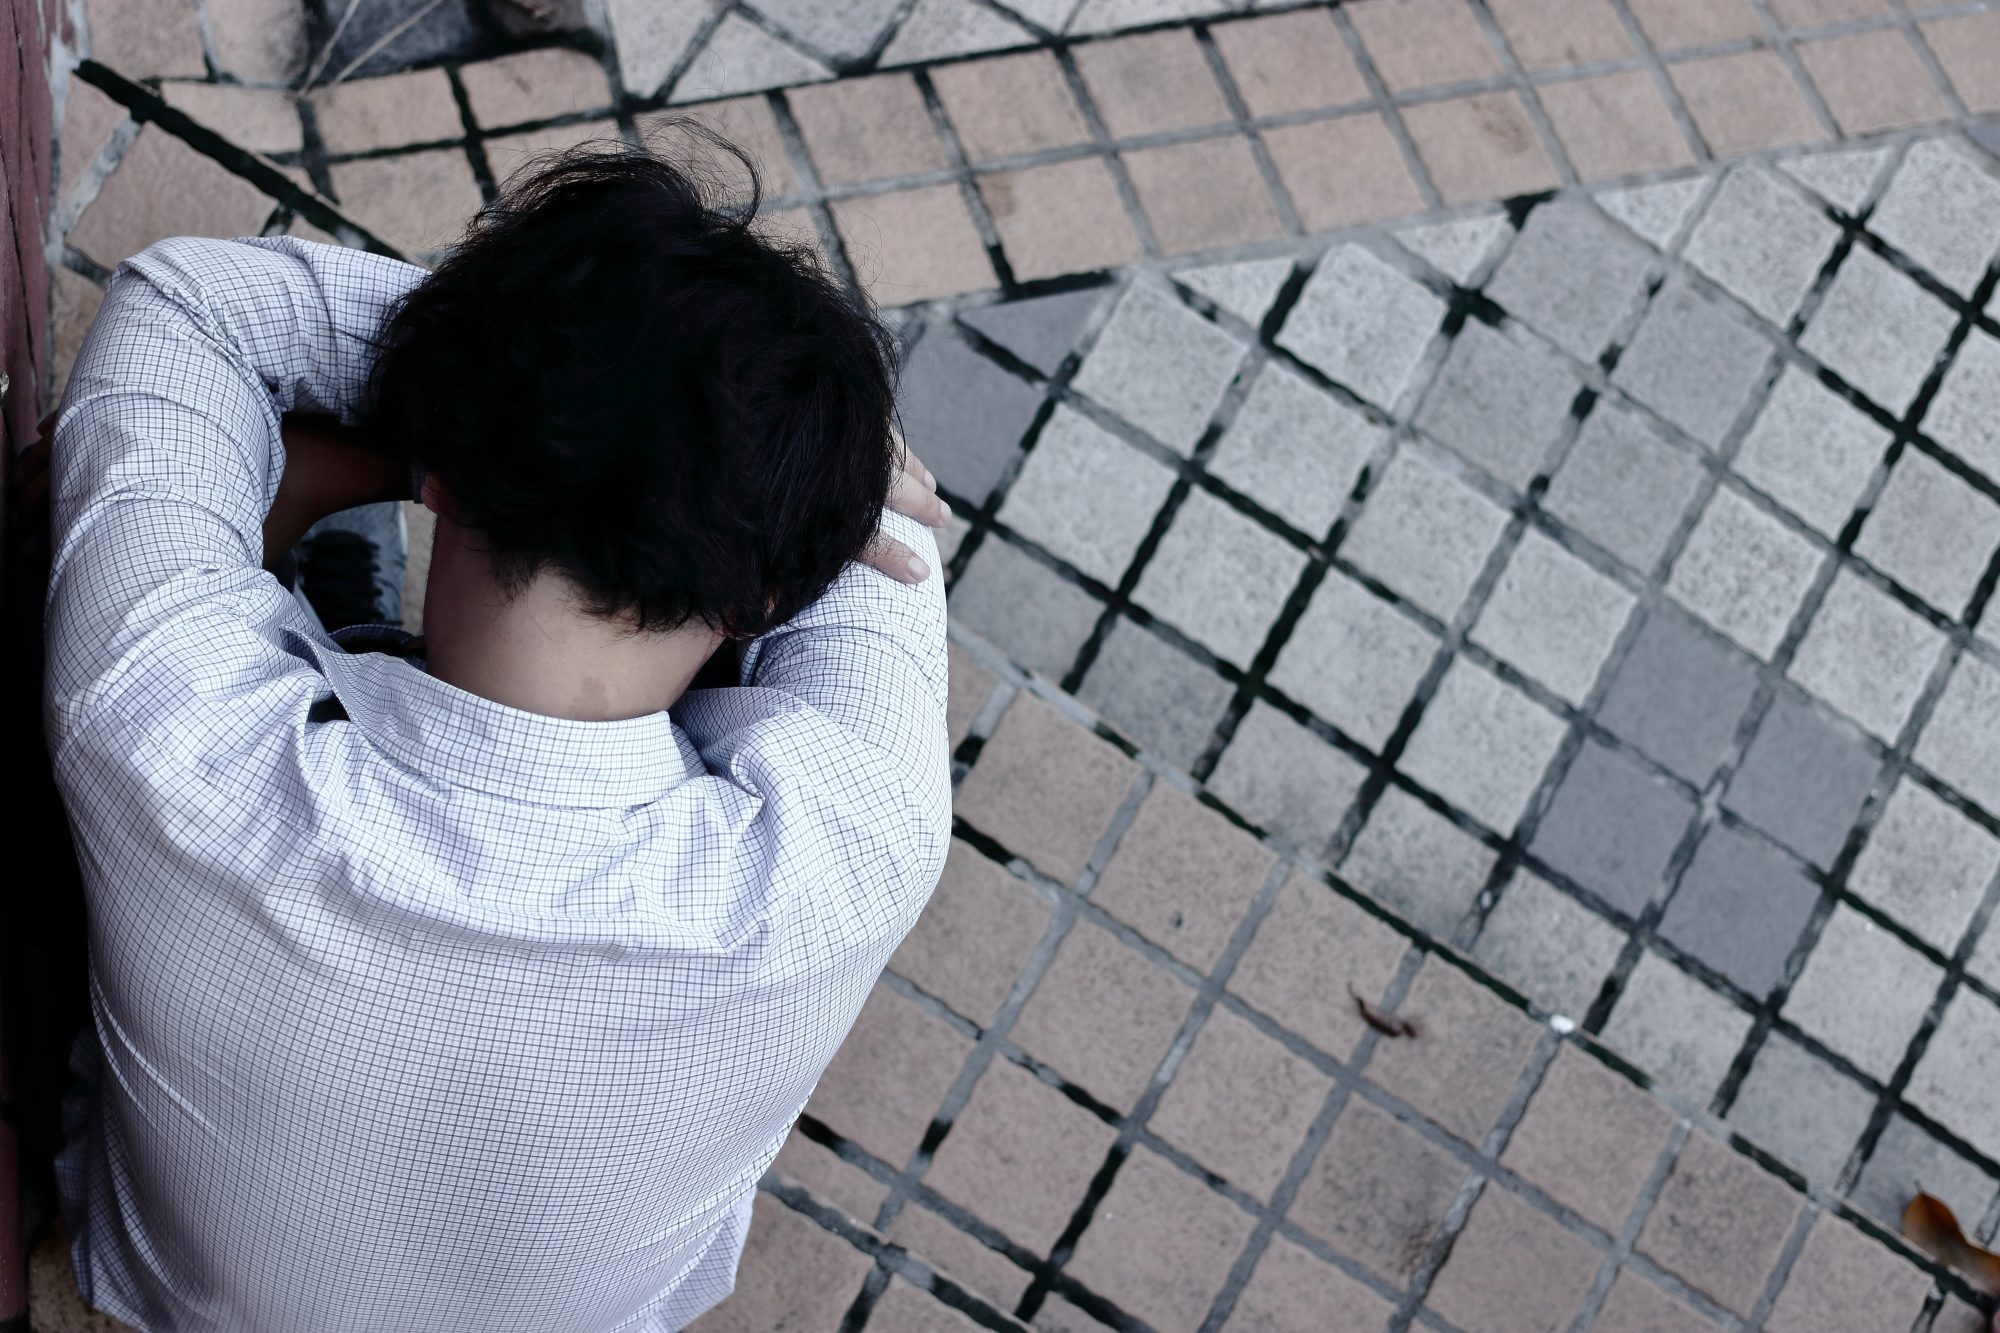 Aerial view of young Asian man in shirt with head in his hands crouched over outside due to depression and workplace violence and harm